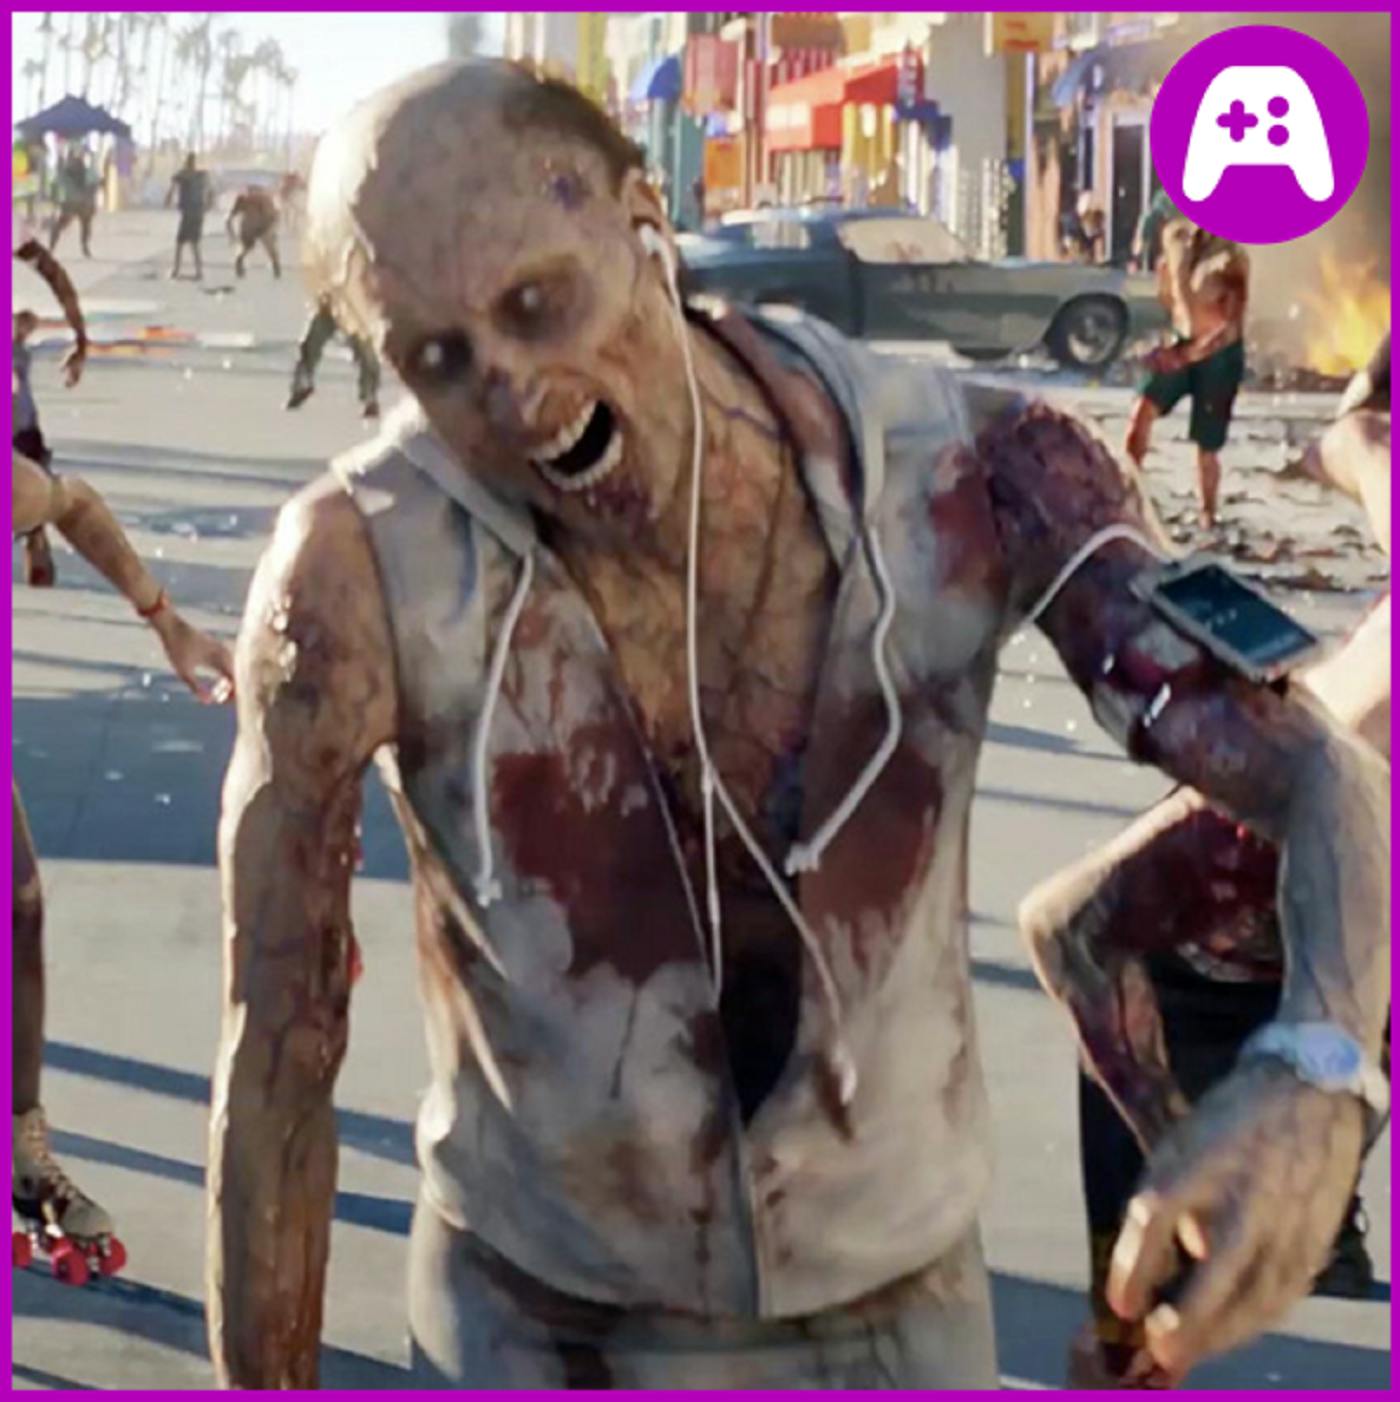 New Saints Row and Dead Island 2 Coming Soon? - What’s Good Games (Ep. 118)